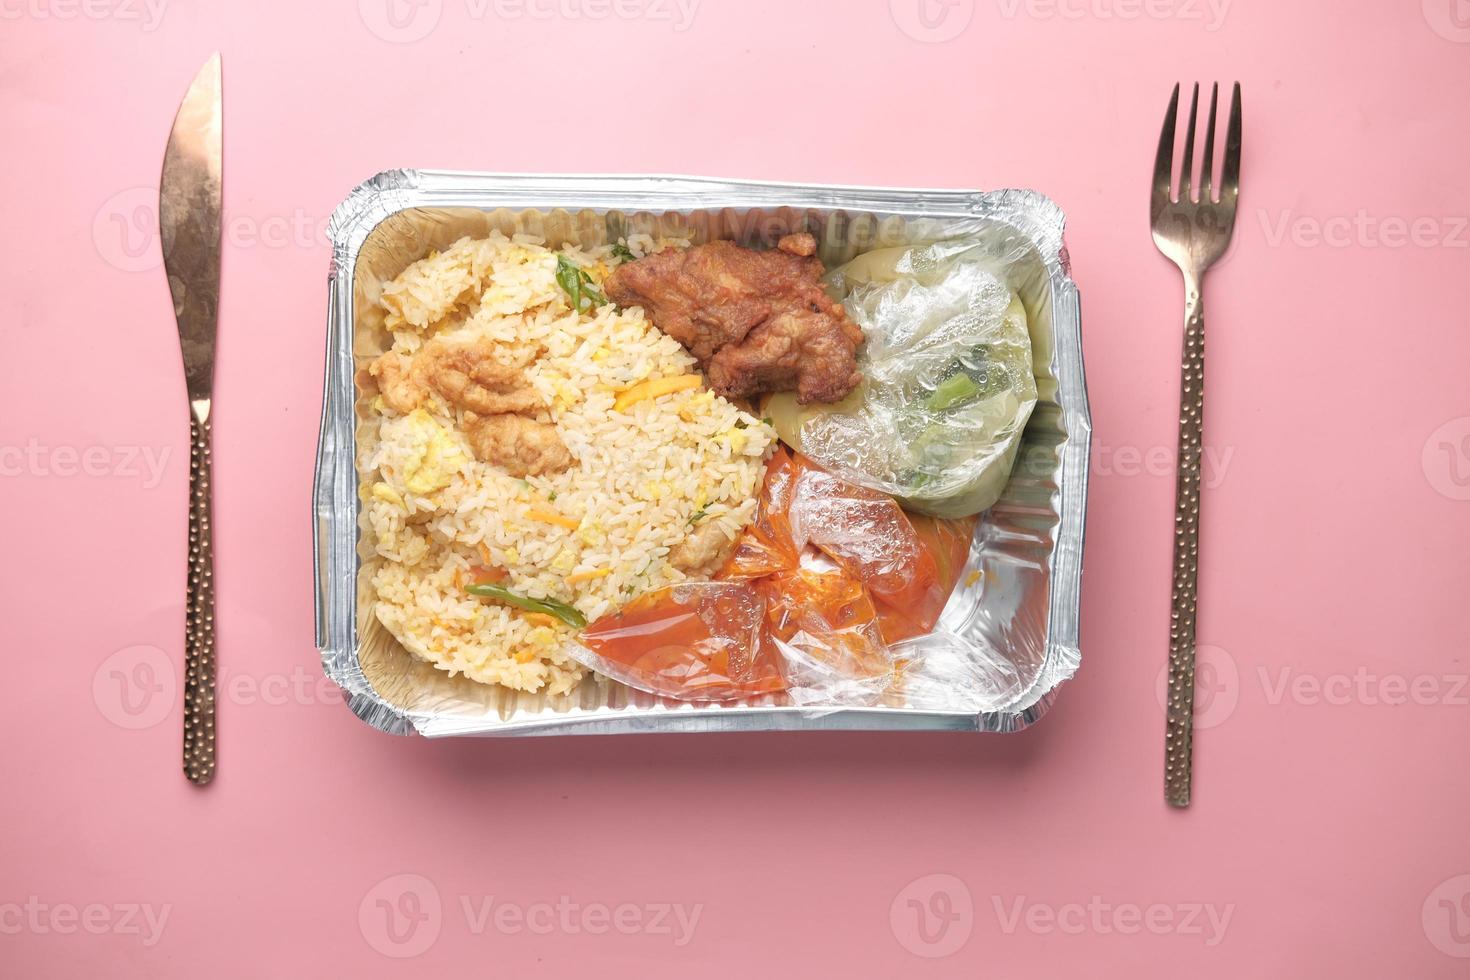 Chicken biryani meal in a takeaway box on table photo